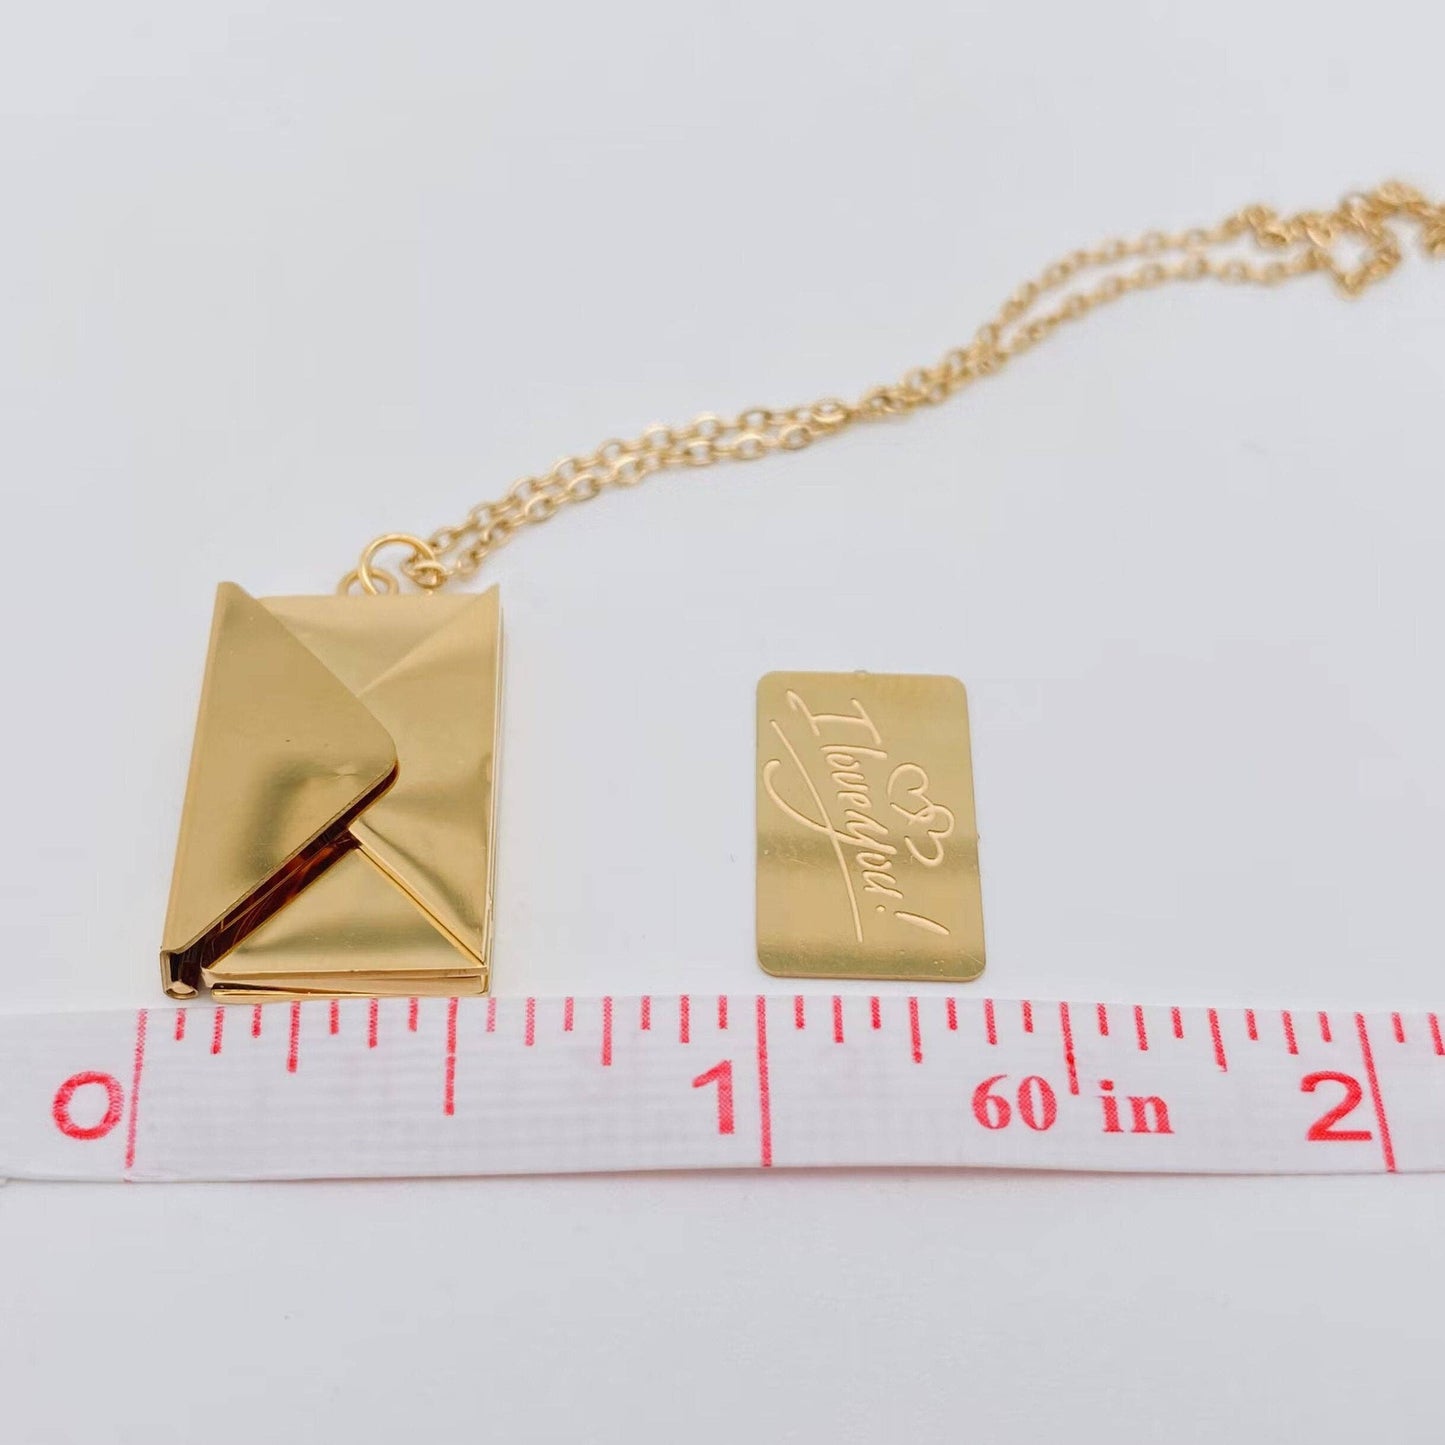 "I Love You" Stainless Steel Openable Envelope Necklace in Gold